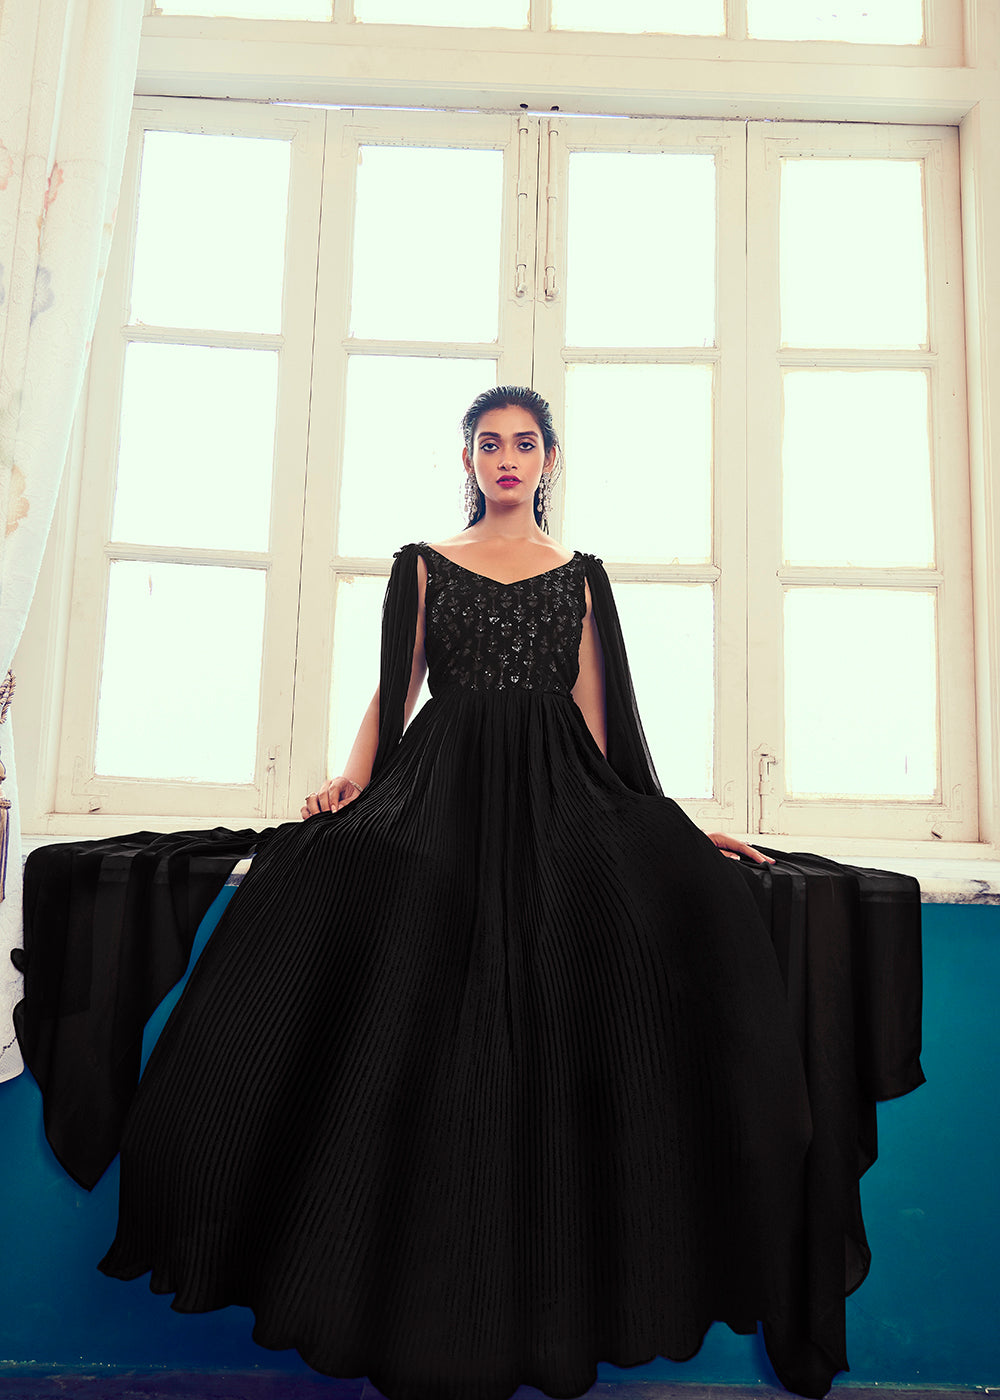 Buy Now Georgette Pretty Black Sequins & Thread Party Wear Gown Online in USA, UK, Australia, New Zealand, Canada & Worldwide at Empress Clothing.